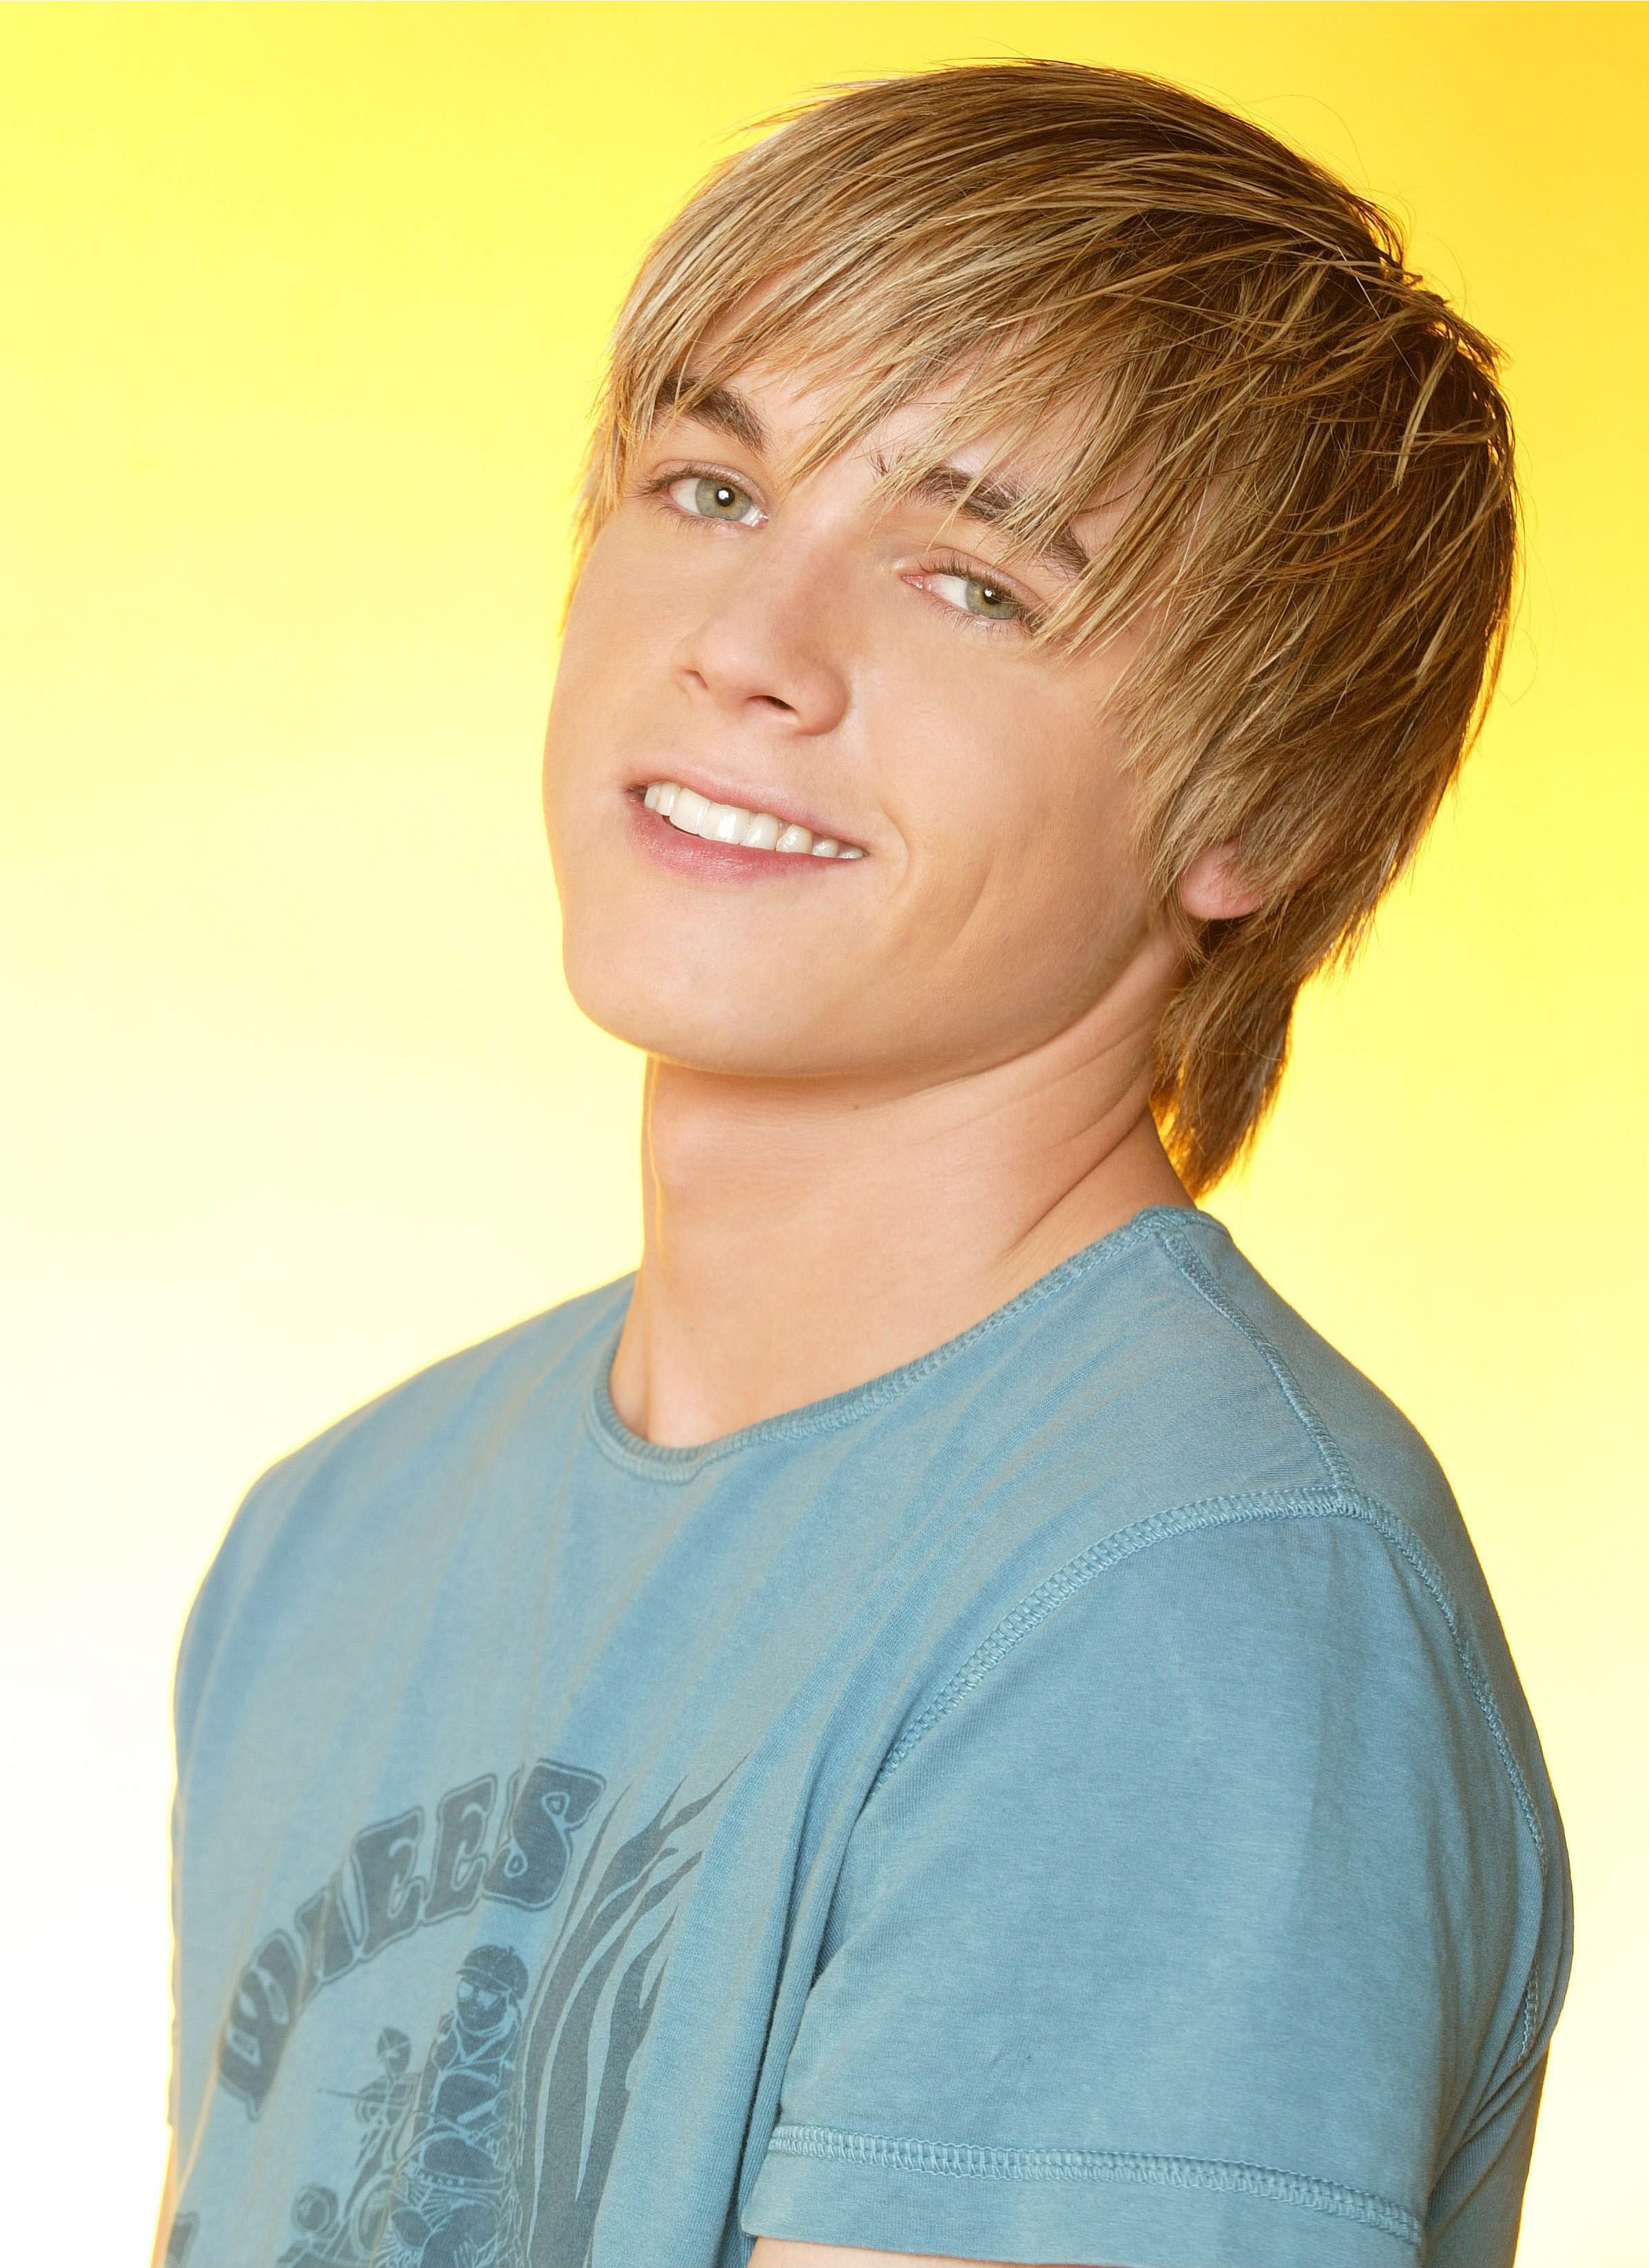 Picture Of Jesse Mccartney In General Pictures Jessemccartney